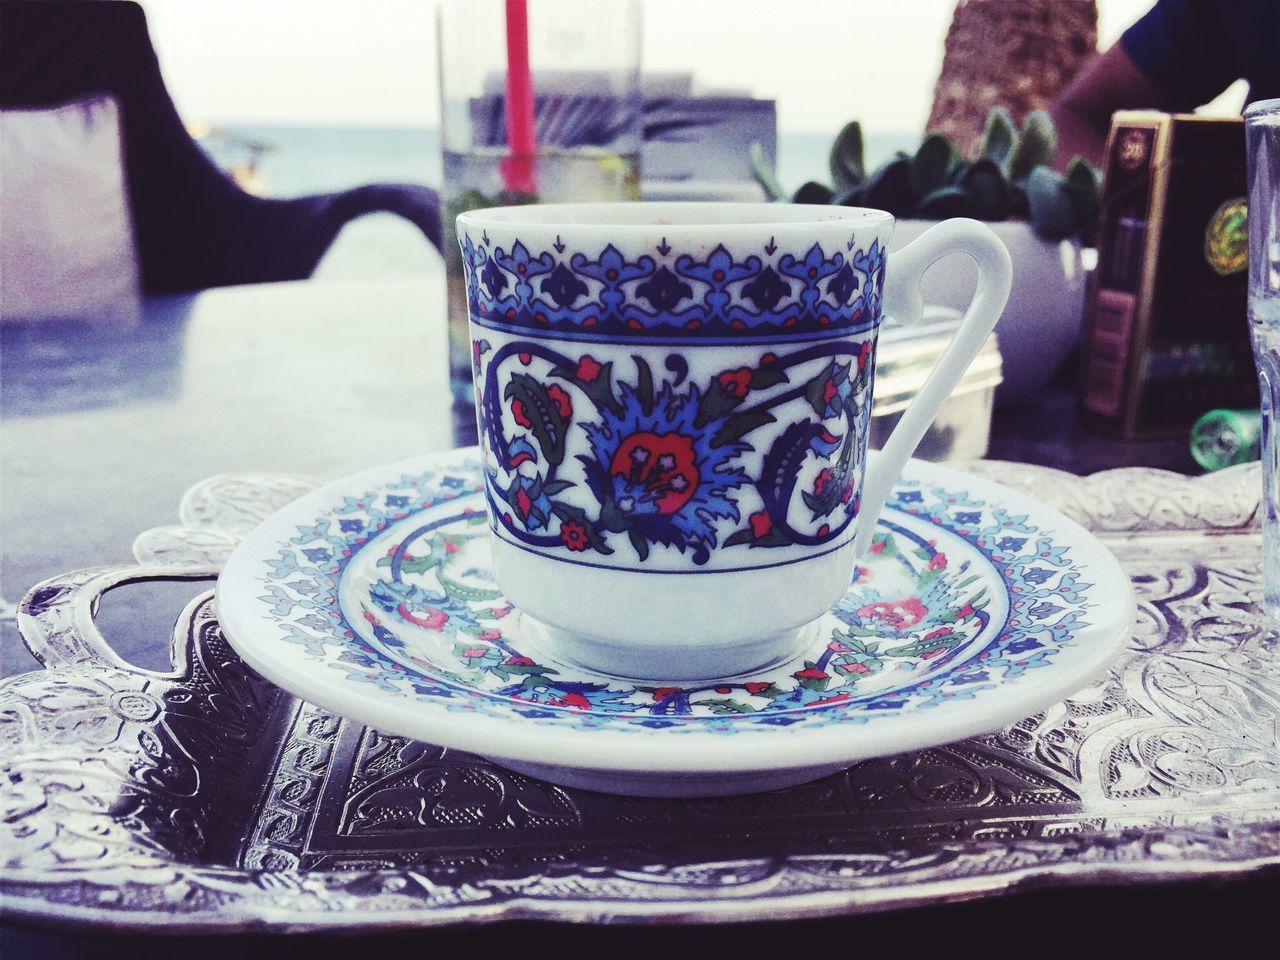 coffee cup, saucer, design, floral pattern, still life, coffee - drink, refreshment, table, drink, food and drink, indoors, close-up, freshness, decoration, creativity, multi colored, focus on foreground, arrangement, non-alcoholic beverage, serving size